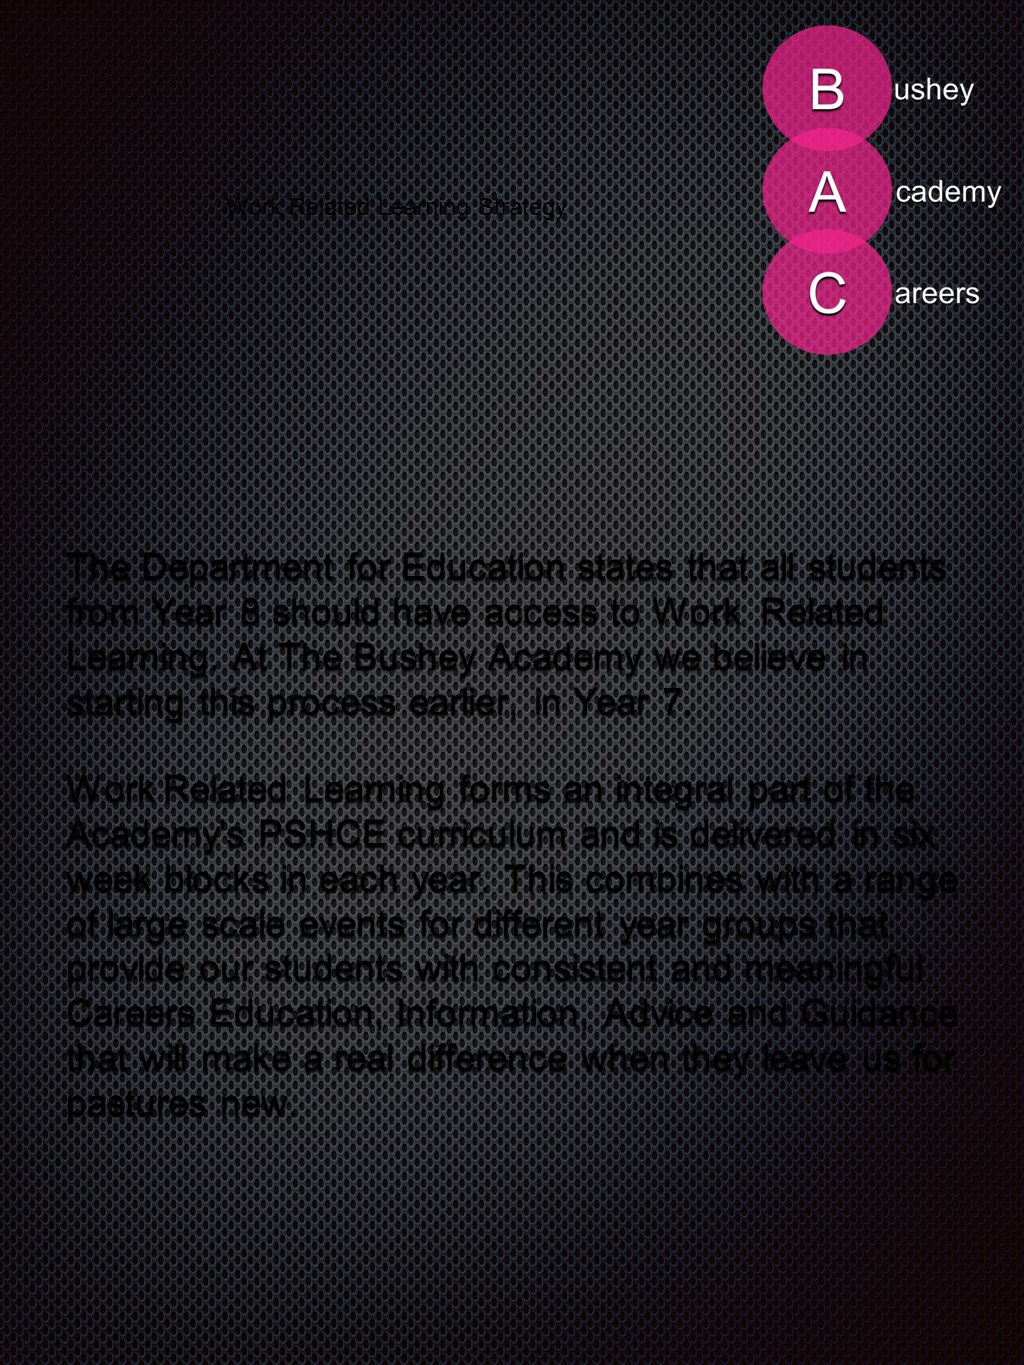 Work Related Learning Strategy The Department for Education states that all students from Year 8 should have access to Work Related Learning.